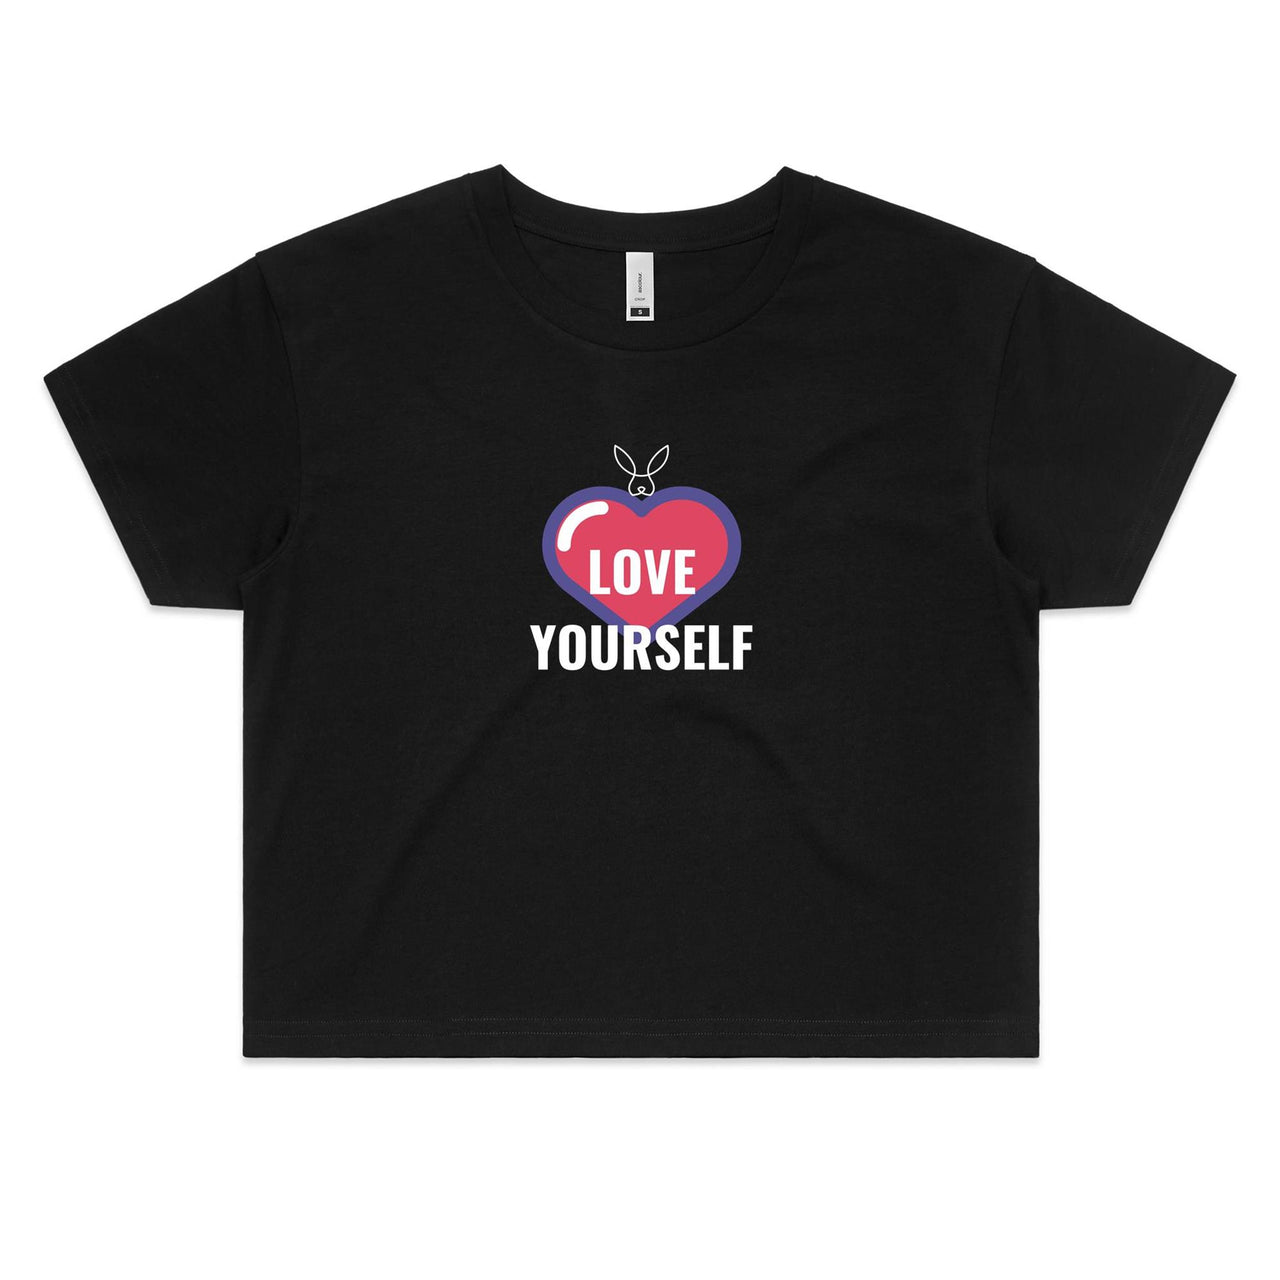 Love Yourself Crop Tee by CBF Clothing Black